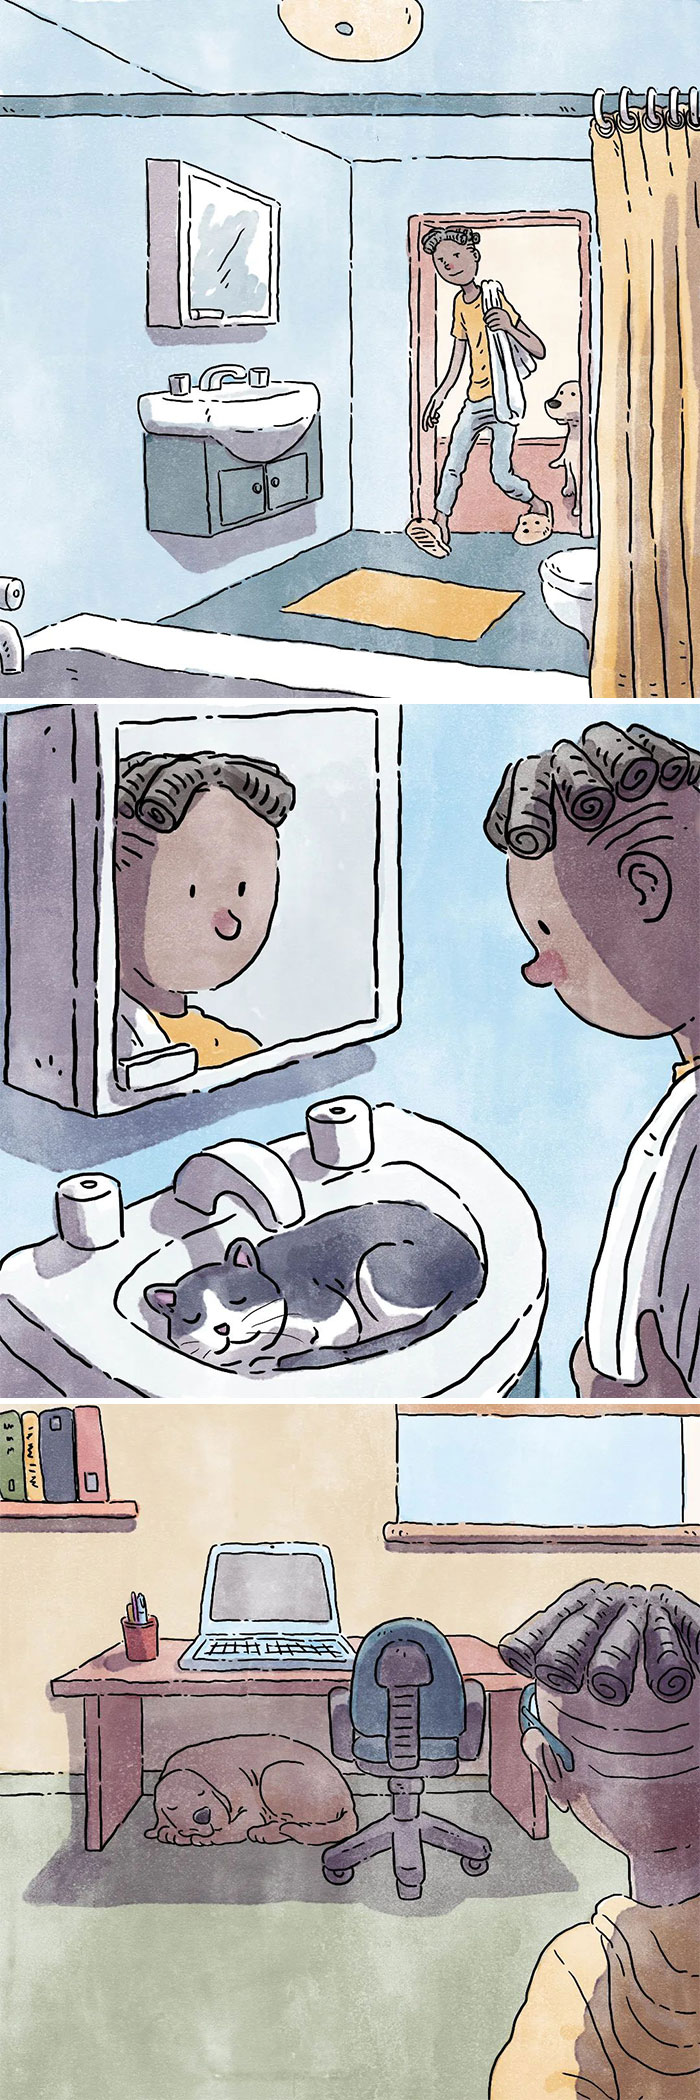 Emotional Comics About Life With A Dog And A Cat By Ademar Vieira (5 New Stories)